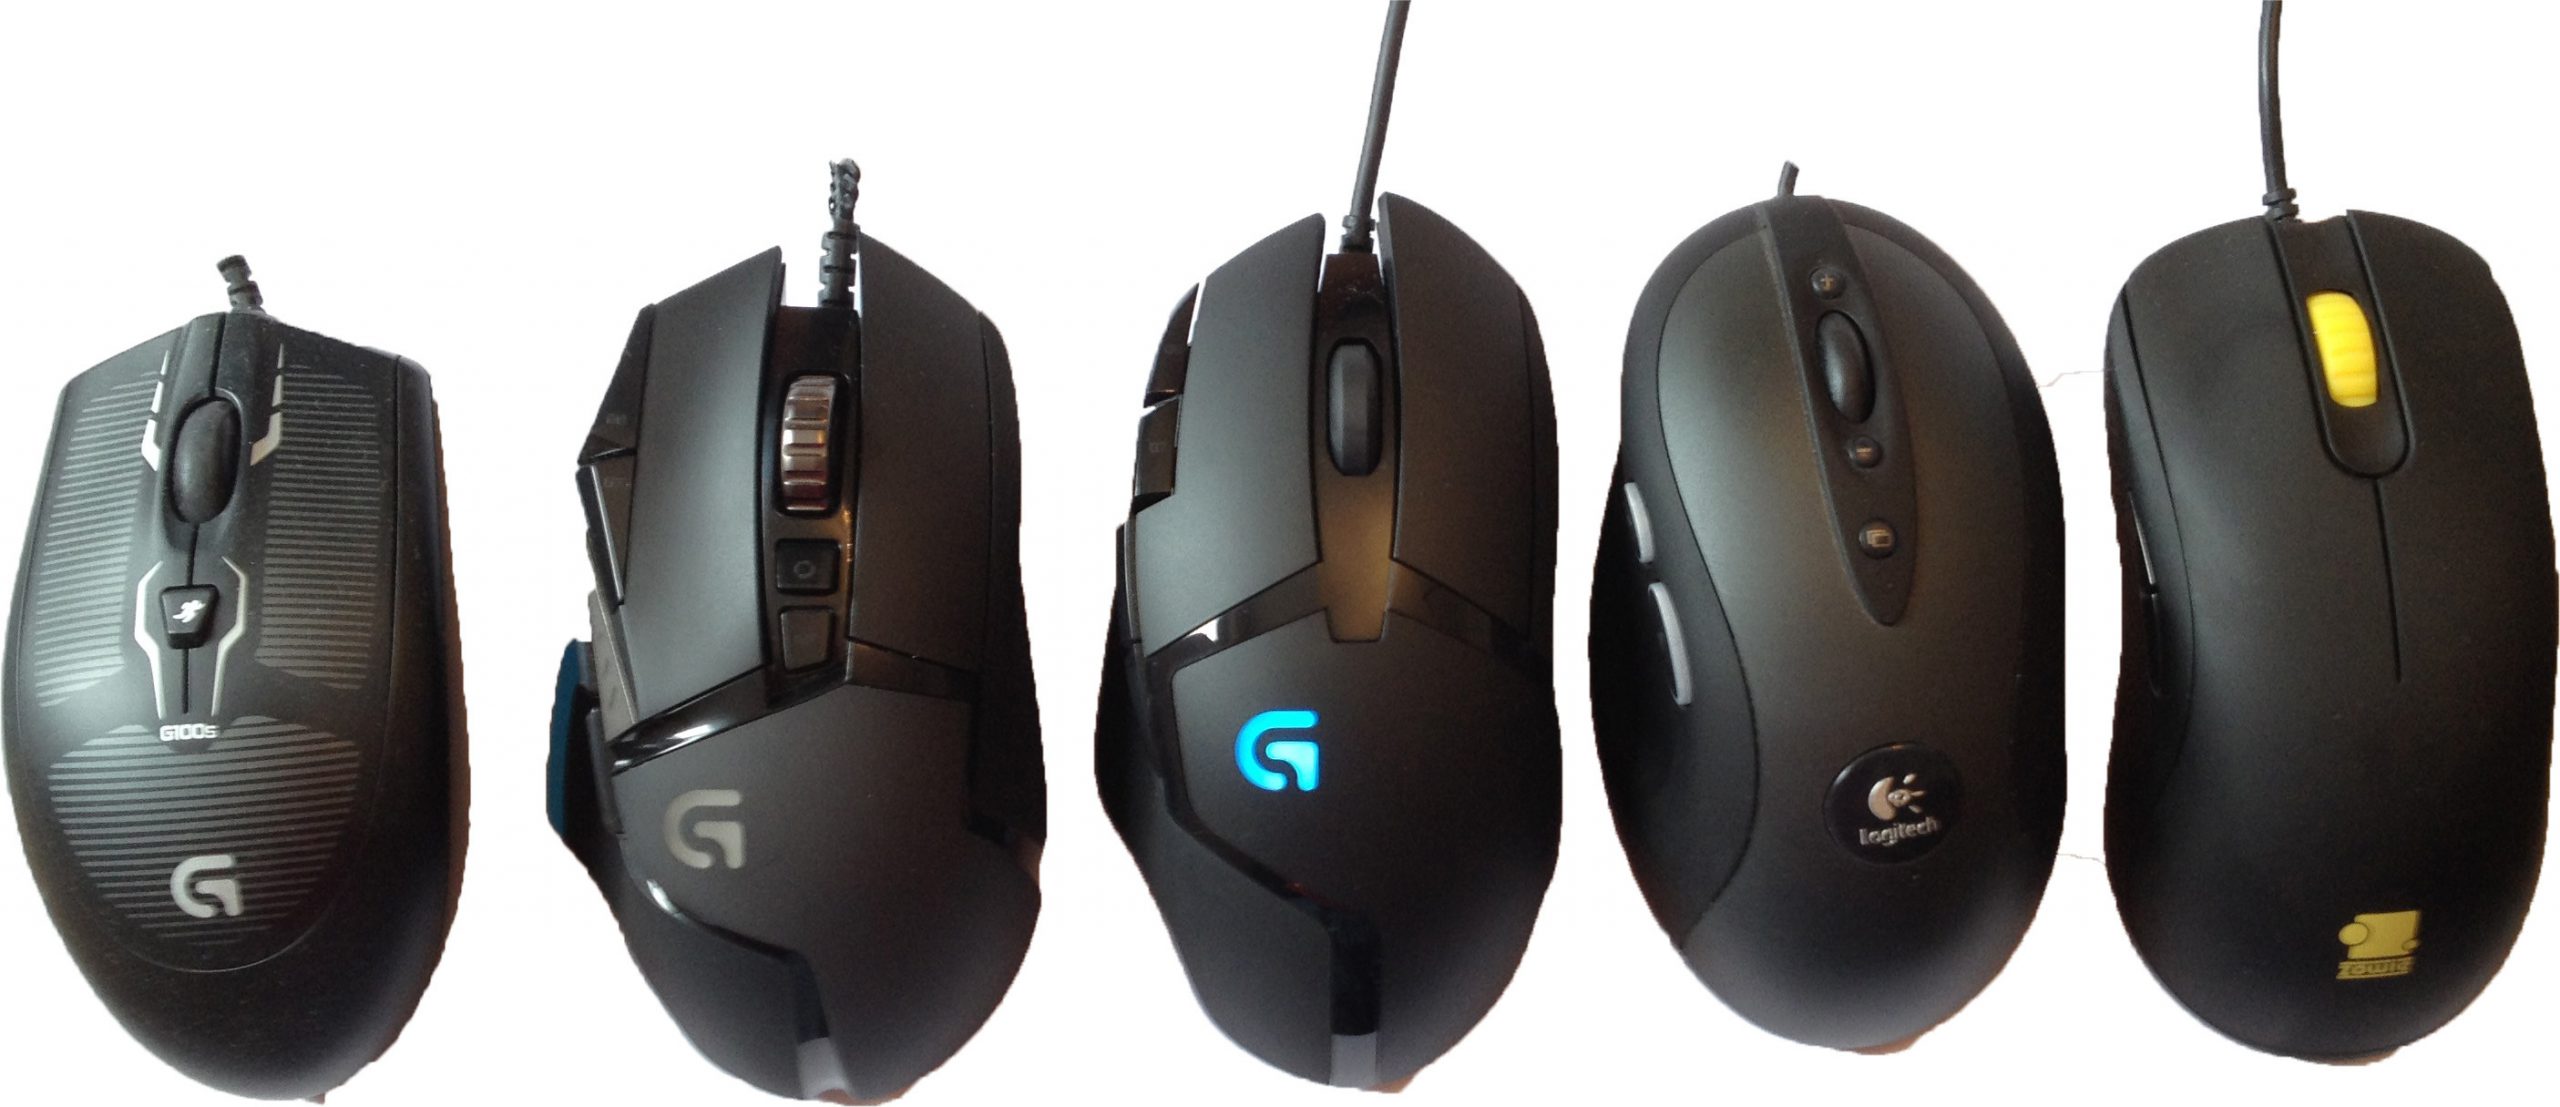 Gaming Mice: What is DPI, and why is it important?